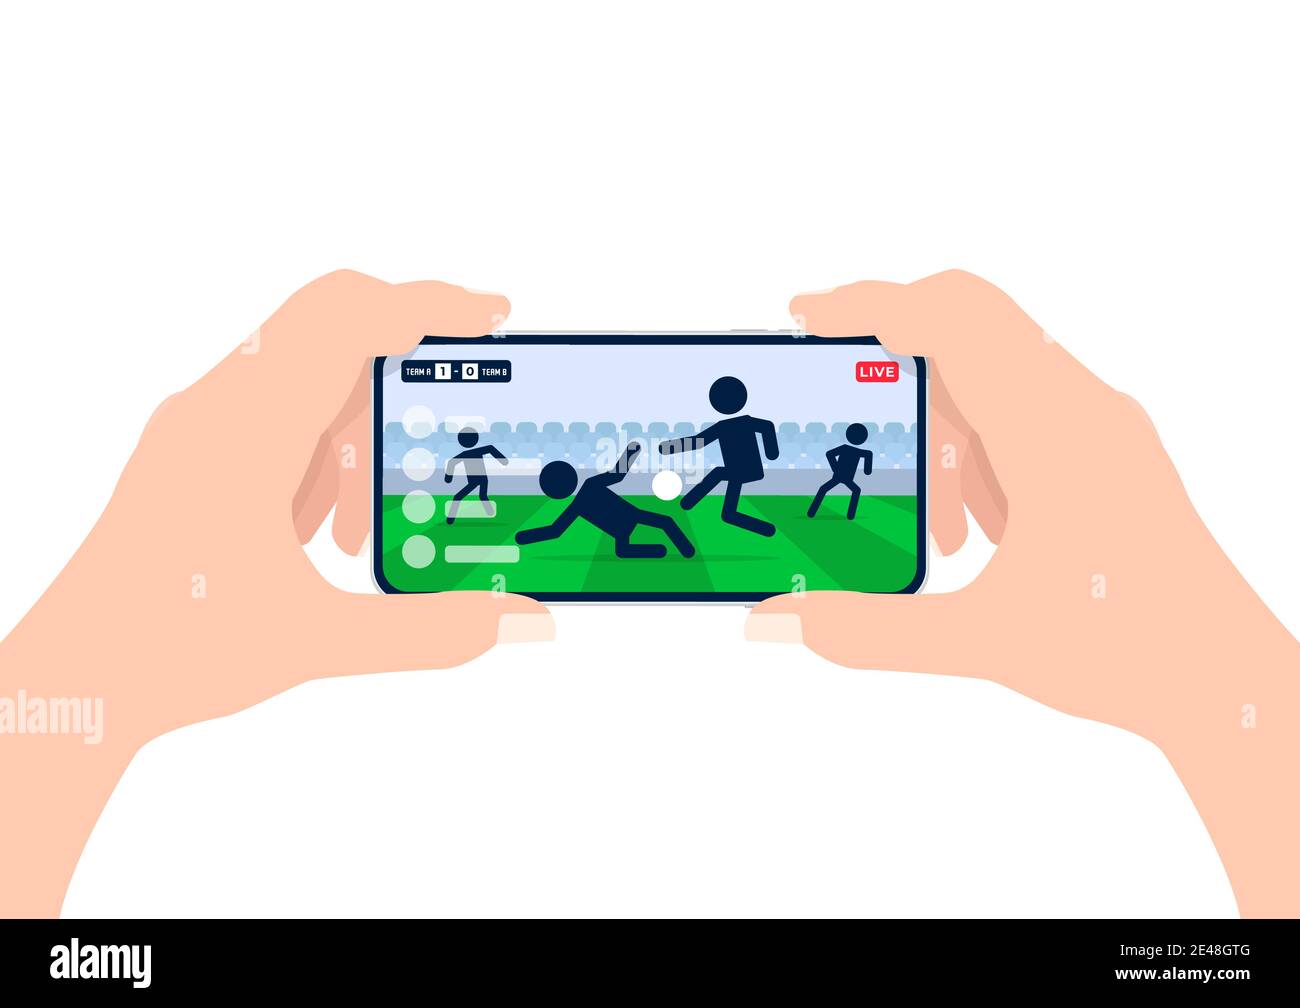 Soccer or football league live streaming on mobile phone. Man hands holding smartphone and watch any live football match online. Stock Vector